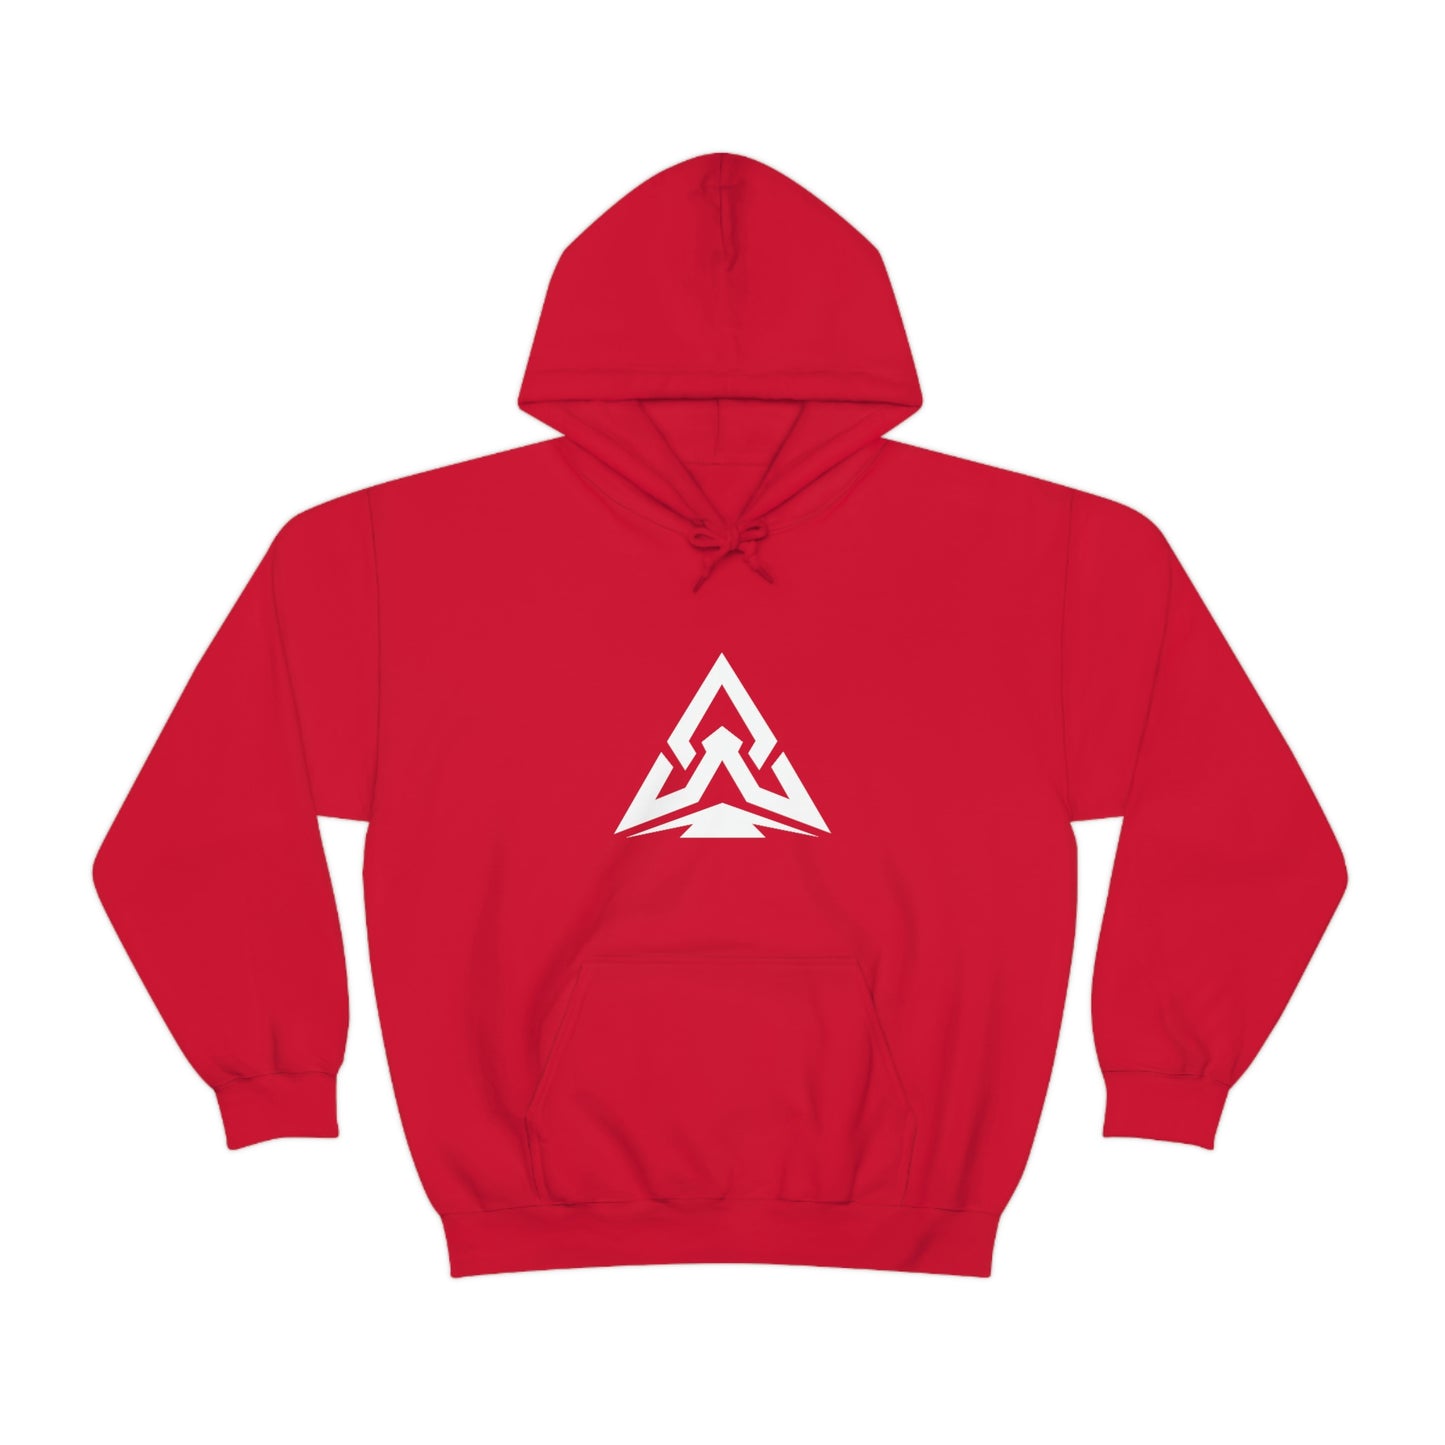 Andy Whittier "AW" Hoodie